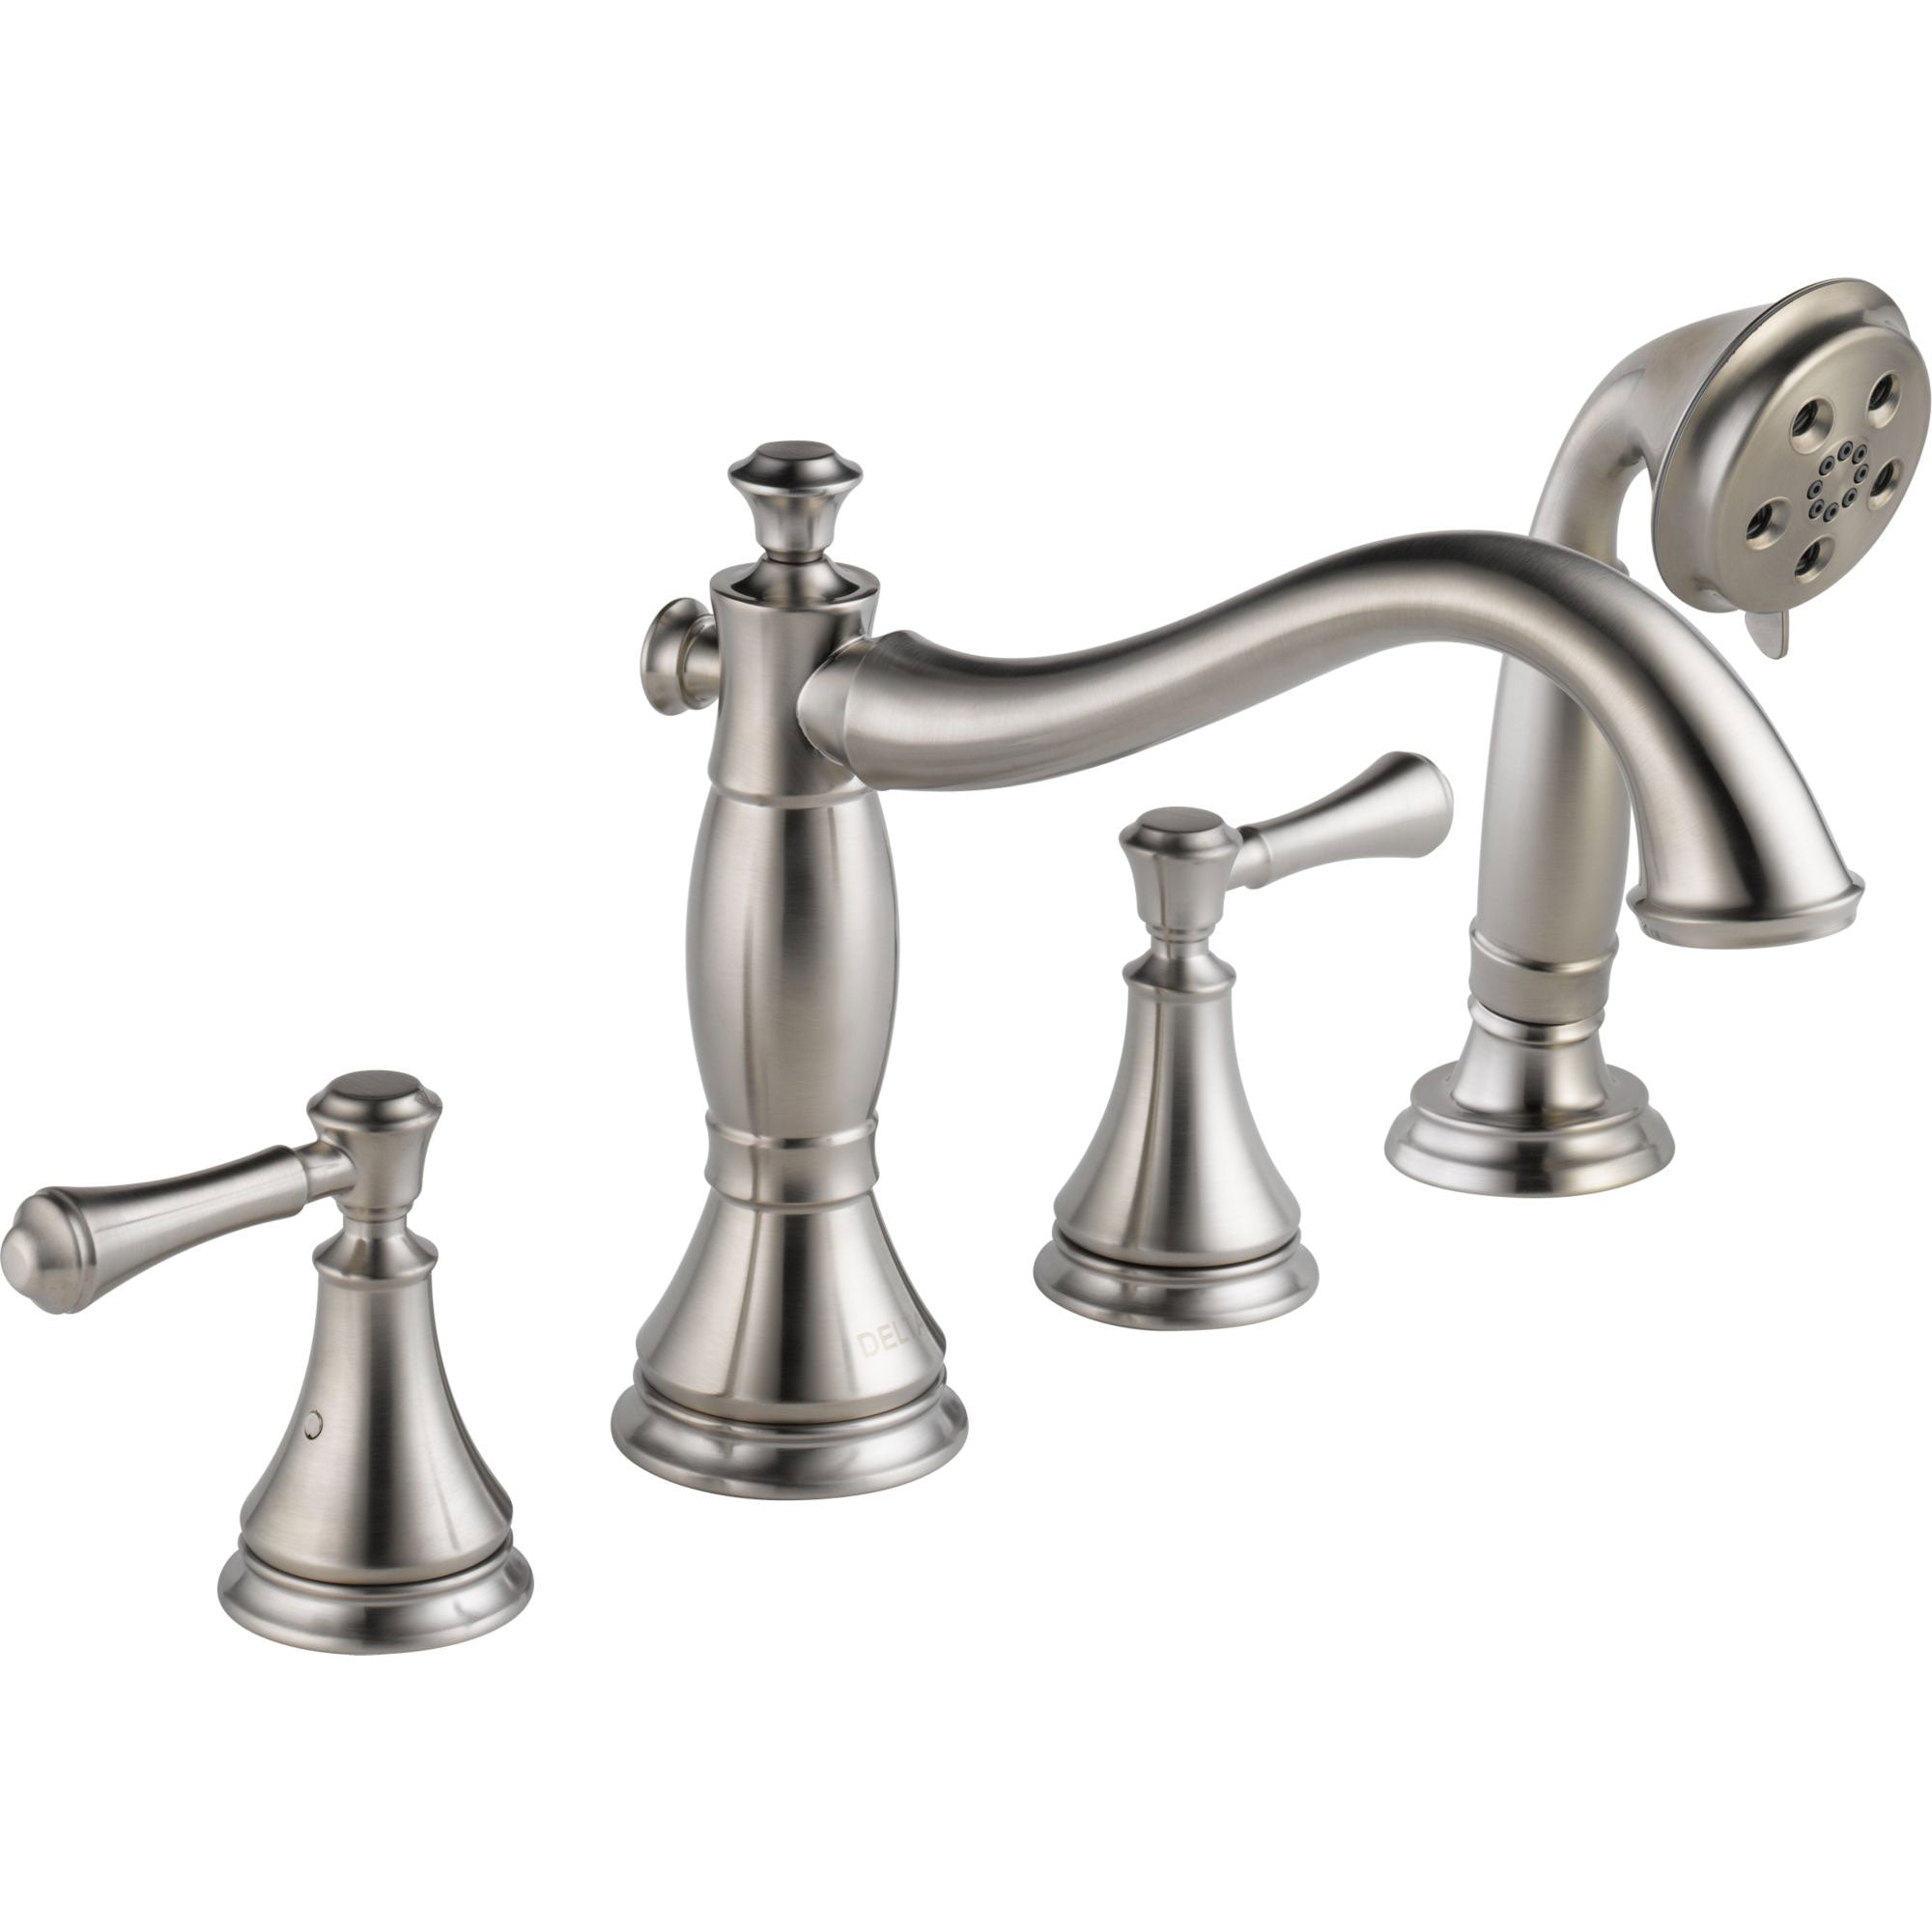 Delta Cassidy Stainless Steel Finish Roman Tub Filler Faucet with Hand Shower Spray INCLUDES Valve and Lever Handles D1064V